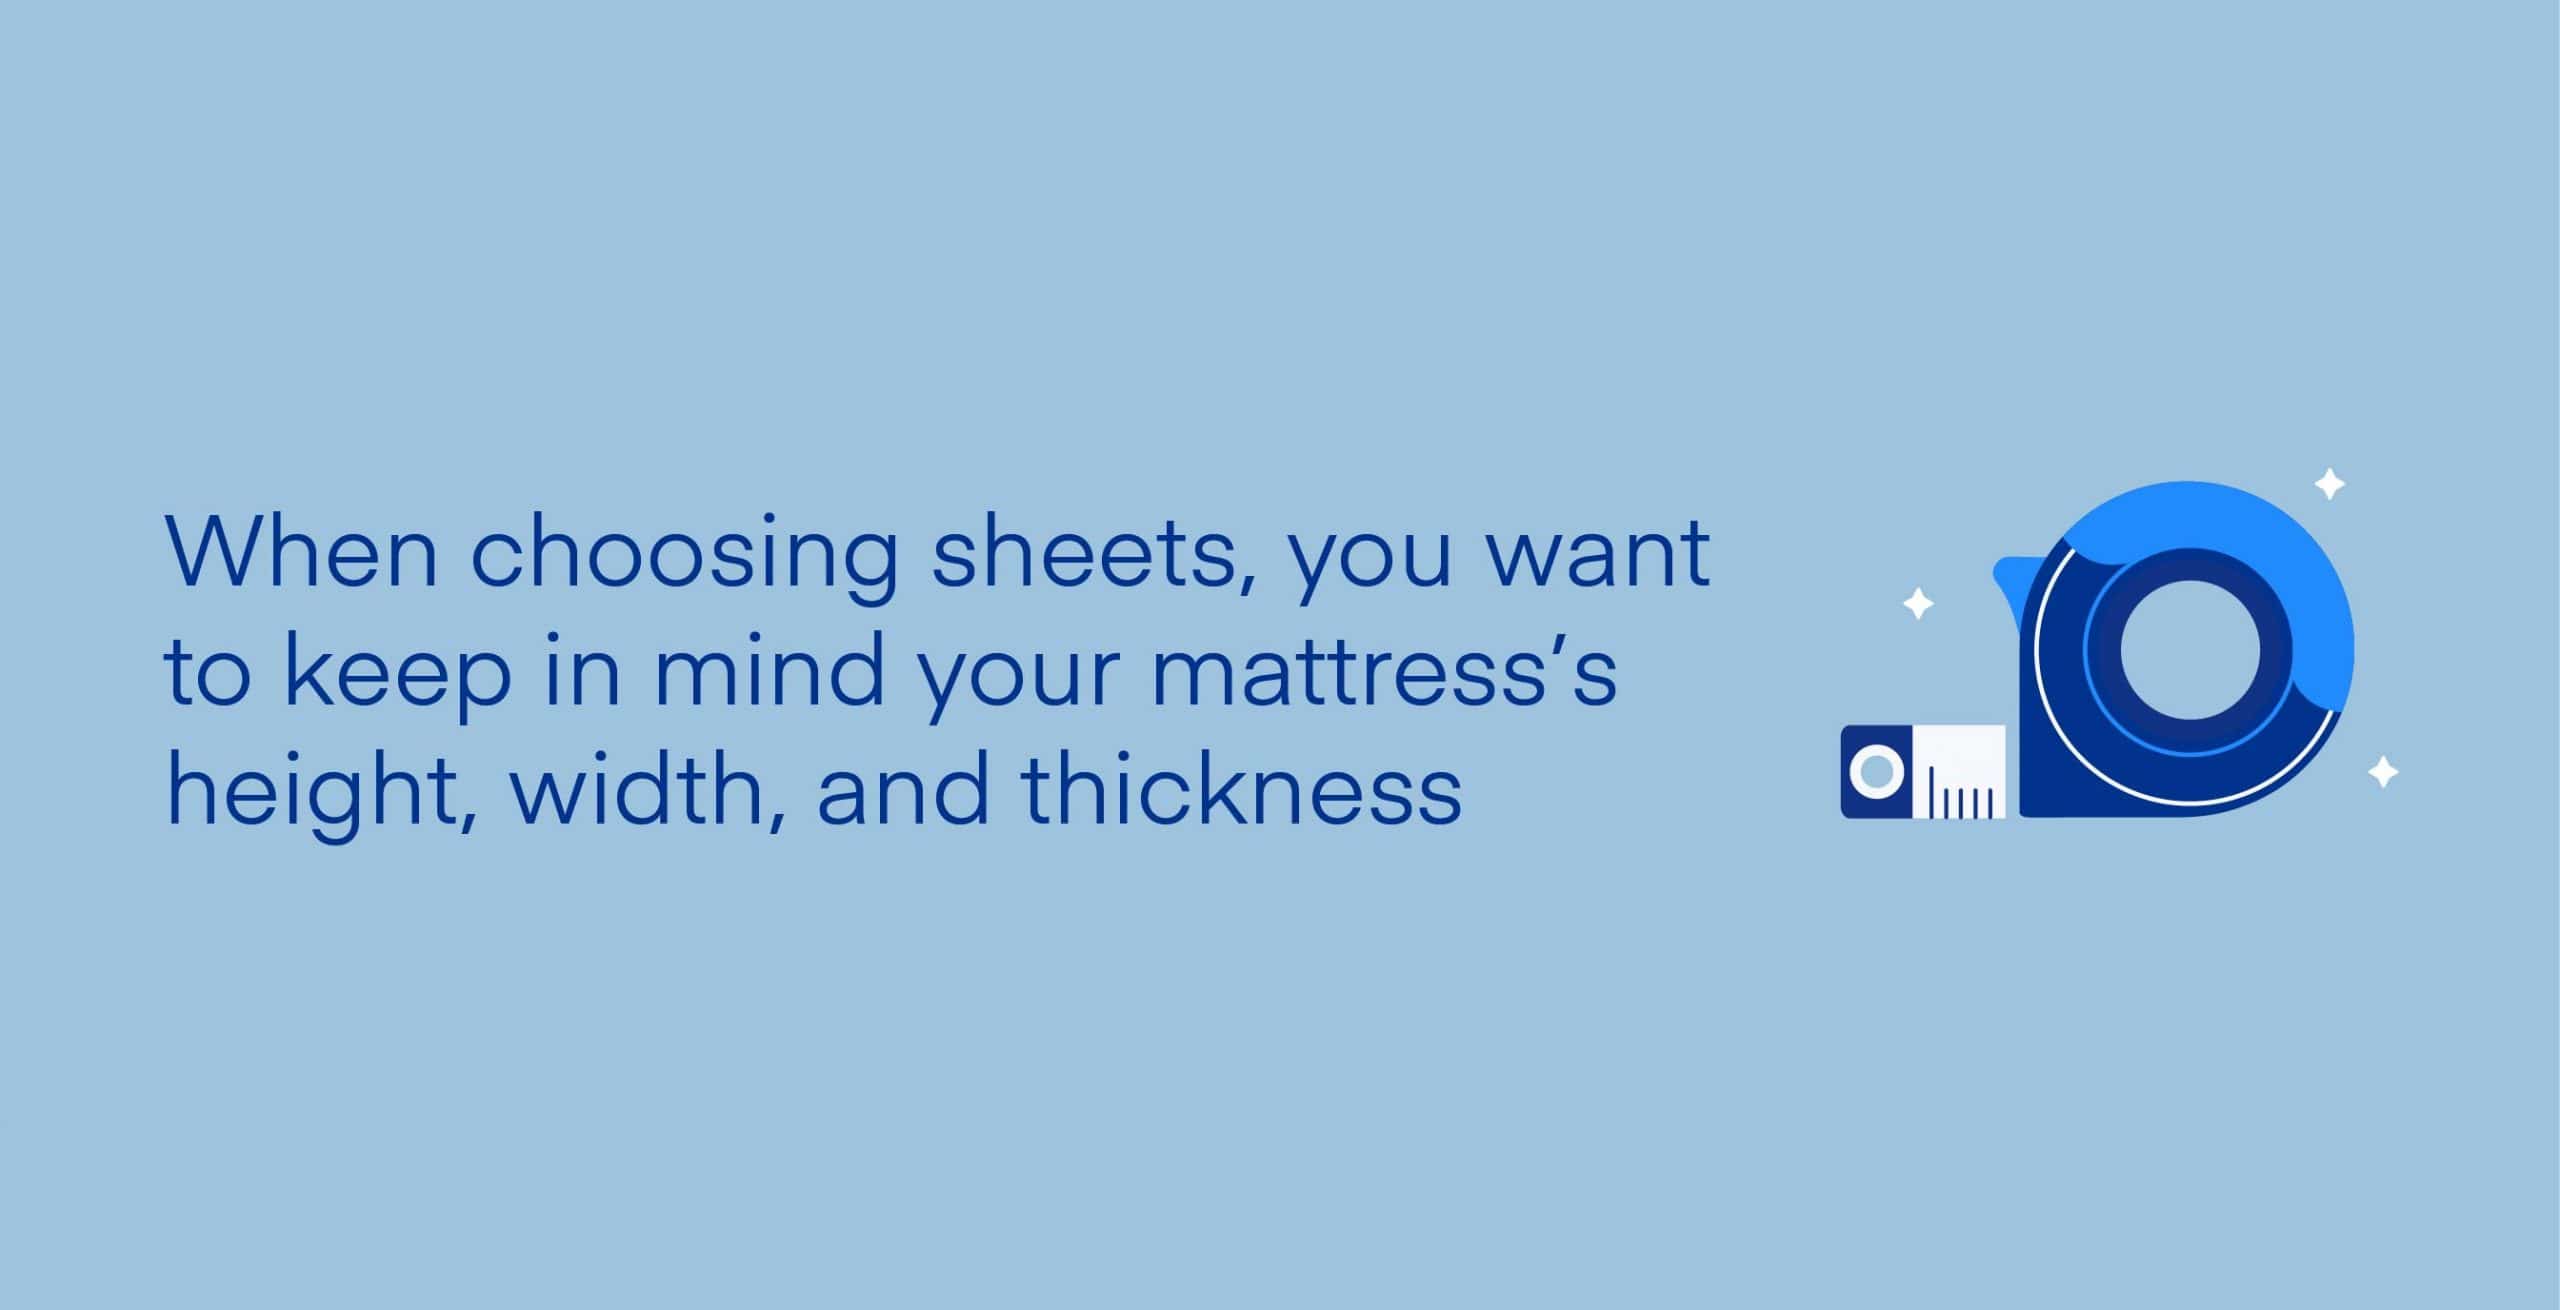 Bed Sheet Sizes And Dimensions Guide, Queen Size Bed Sheets Dimensions Cm